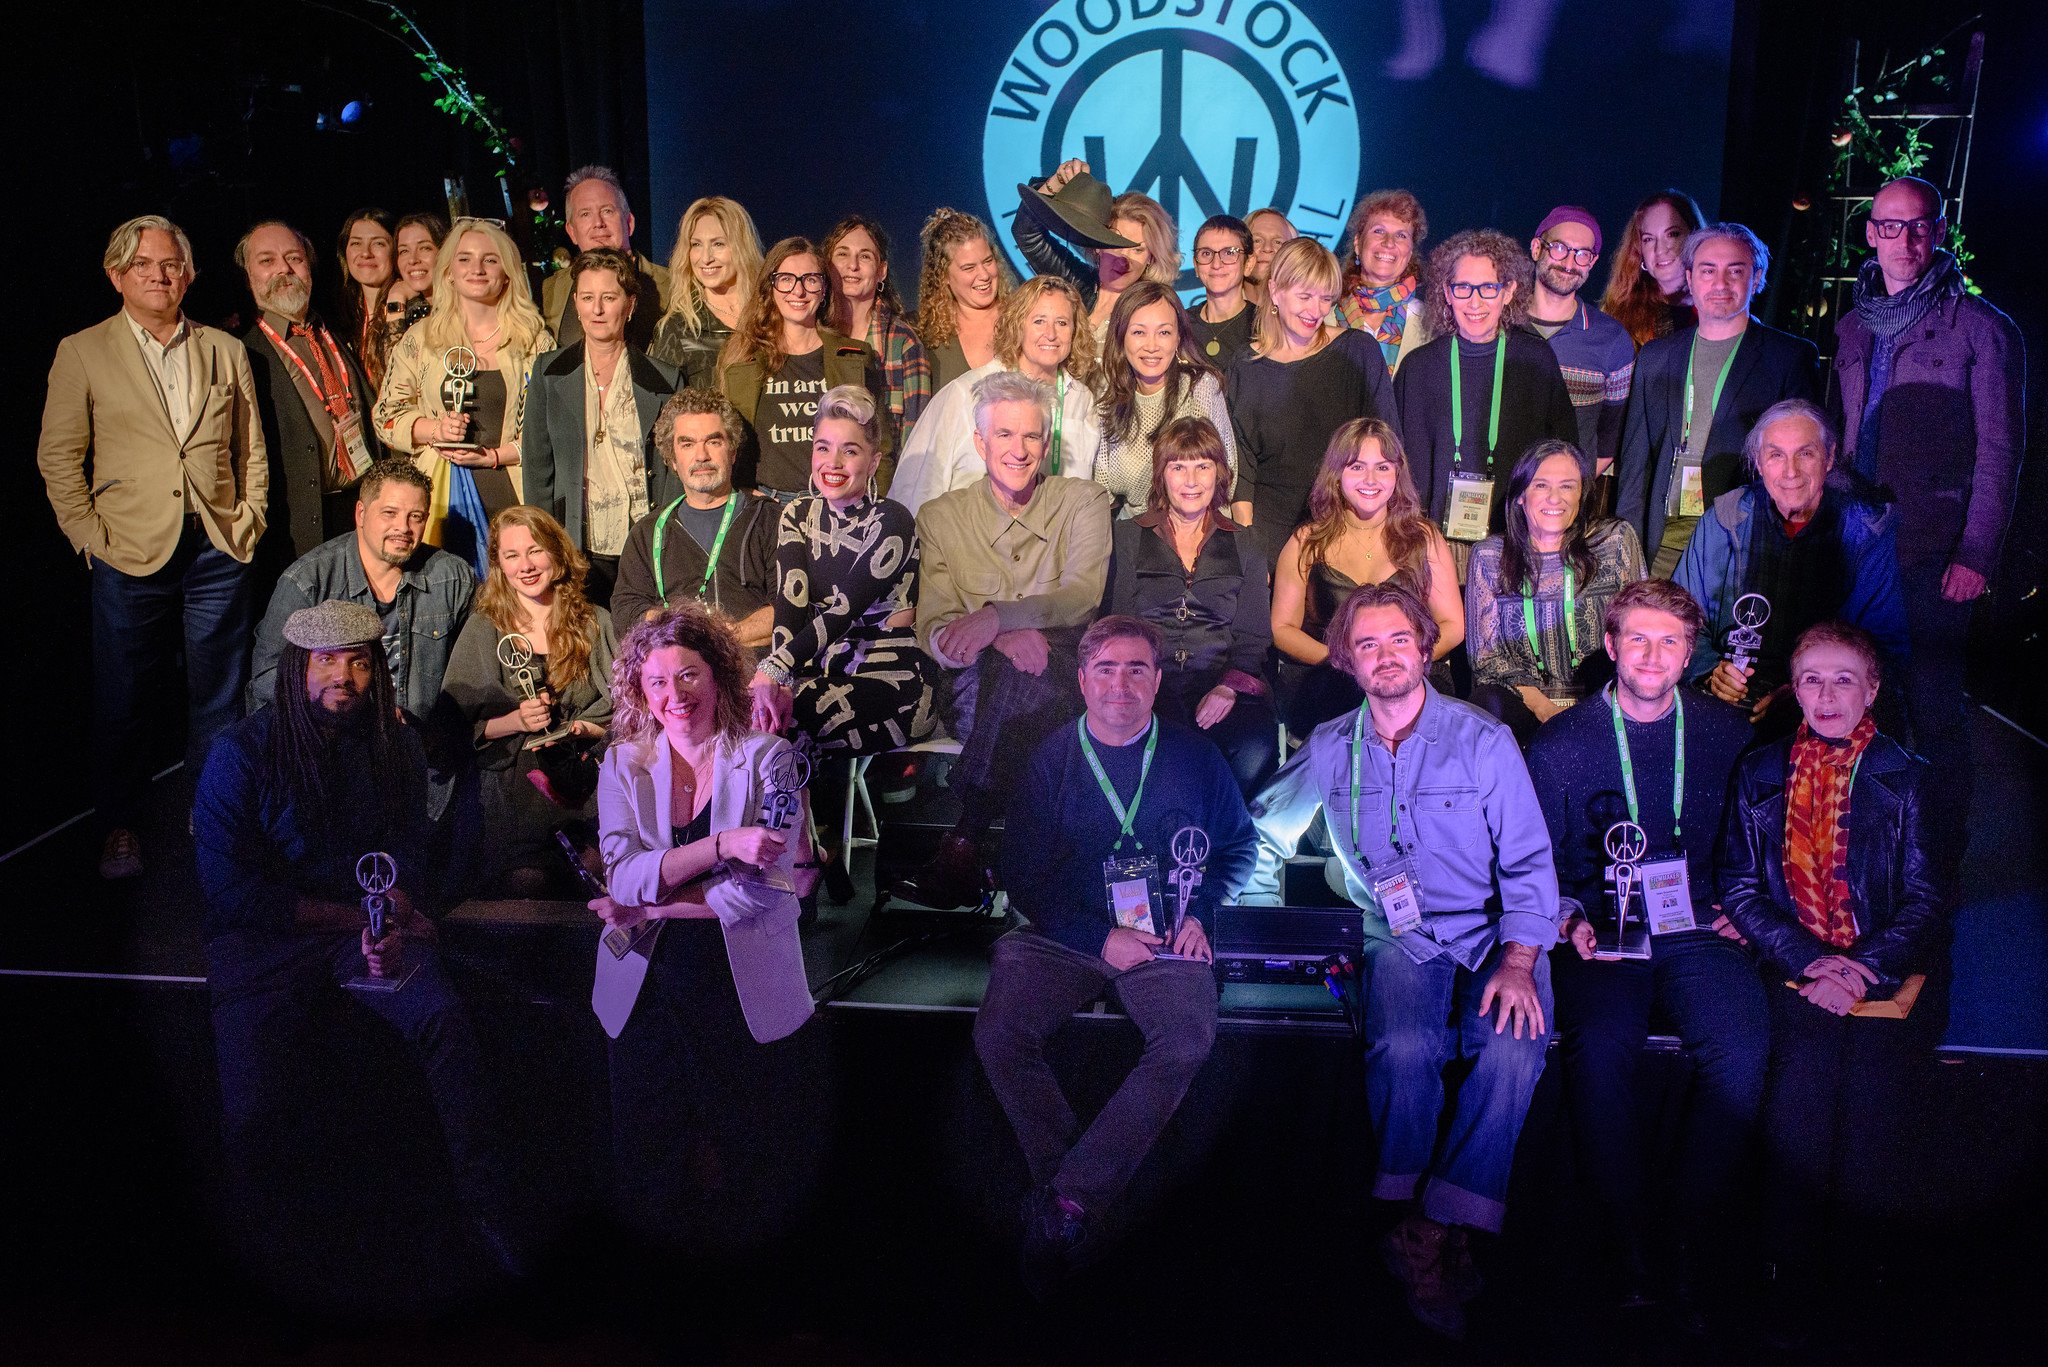 Award Winners from the 24th Annual Woodstock Film Festival